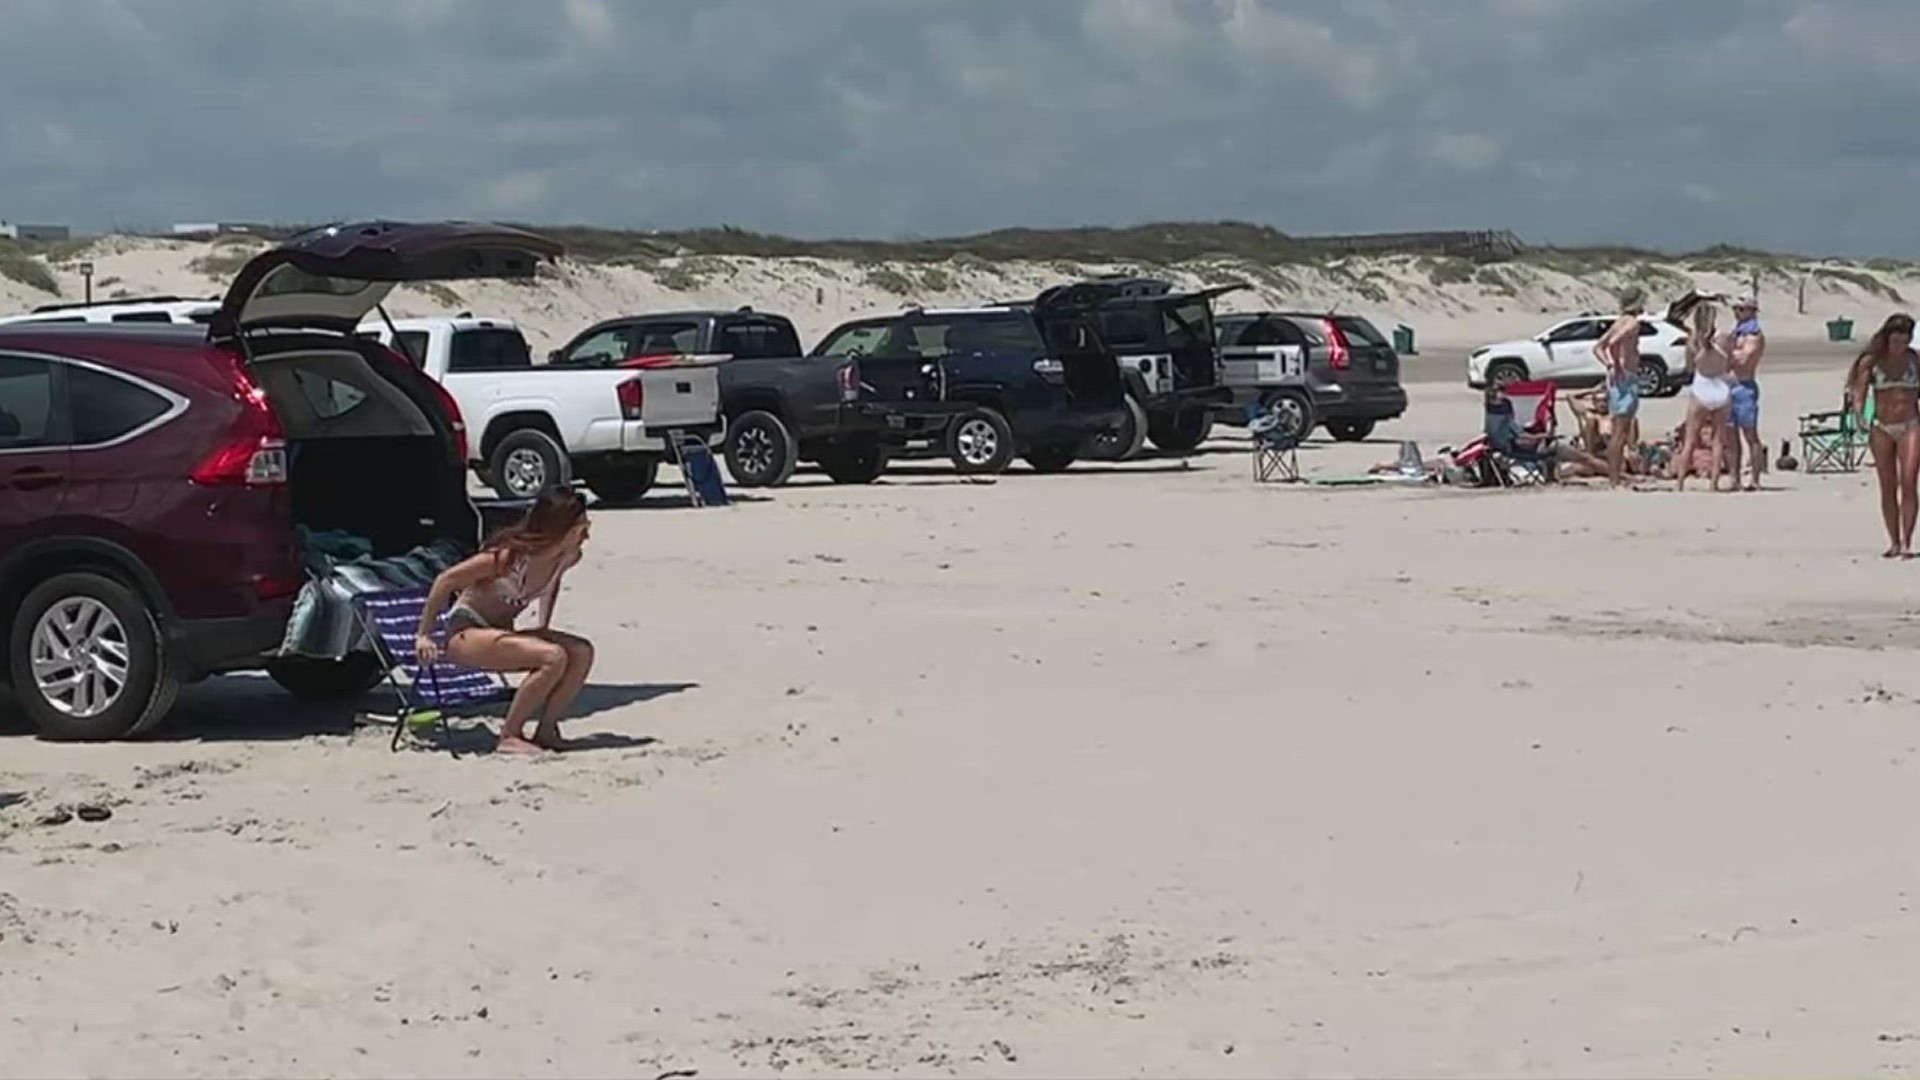 The city is hoping that the two resolutions will let the state and federal government know that beaches need to stay open and the turtle program should continue on.